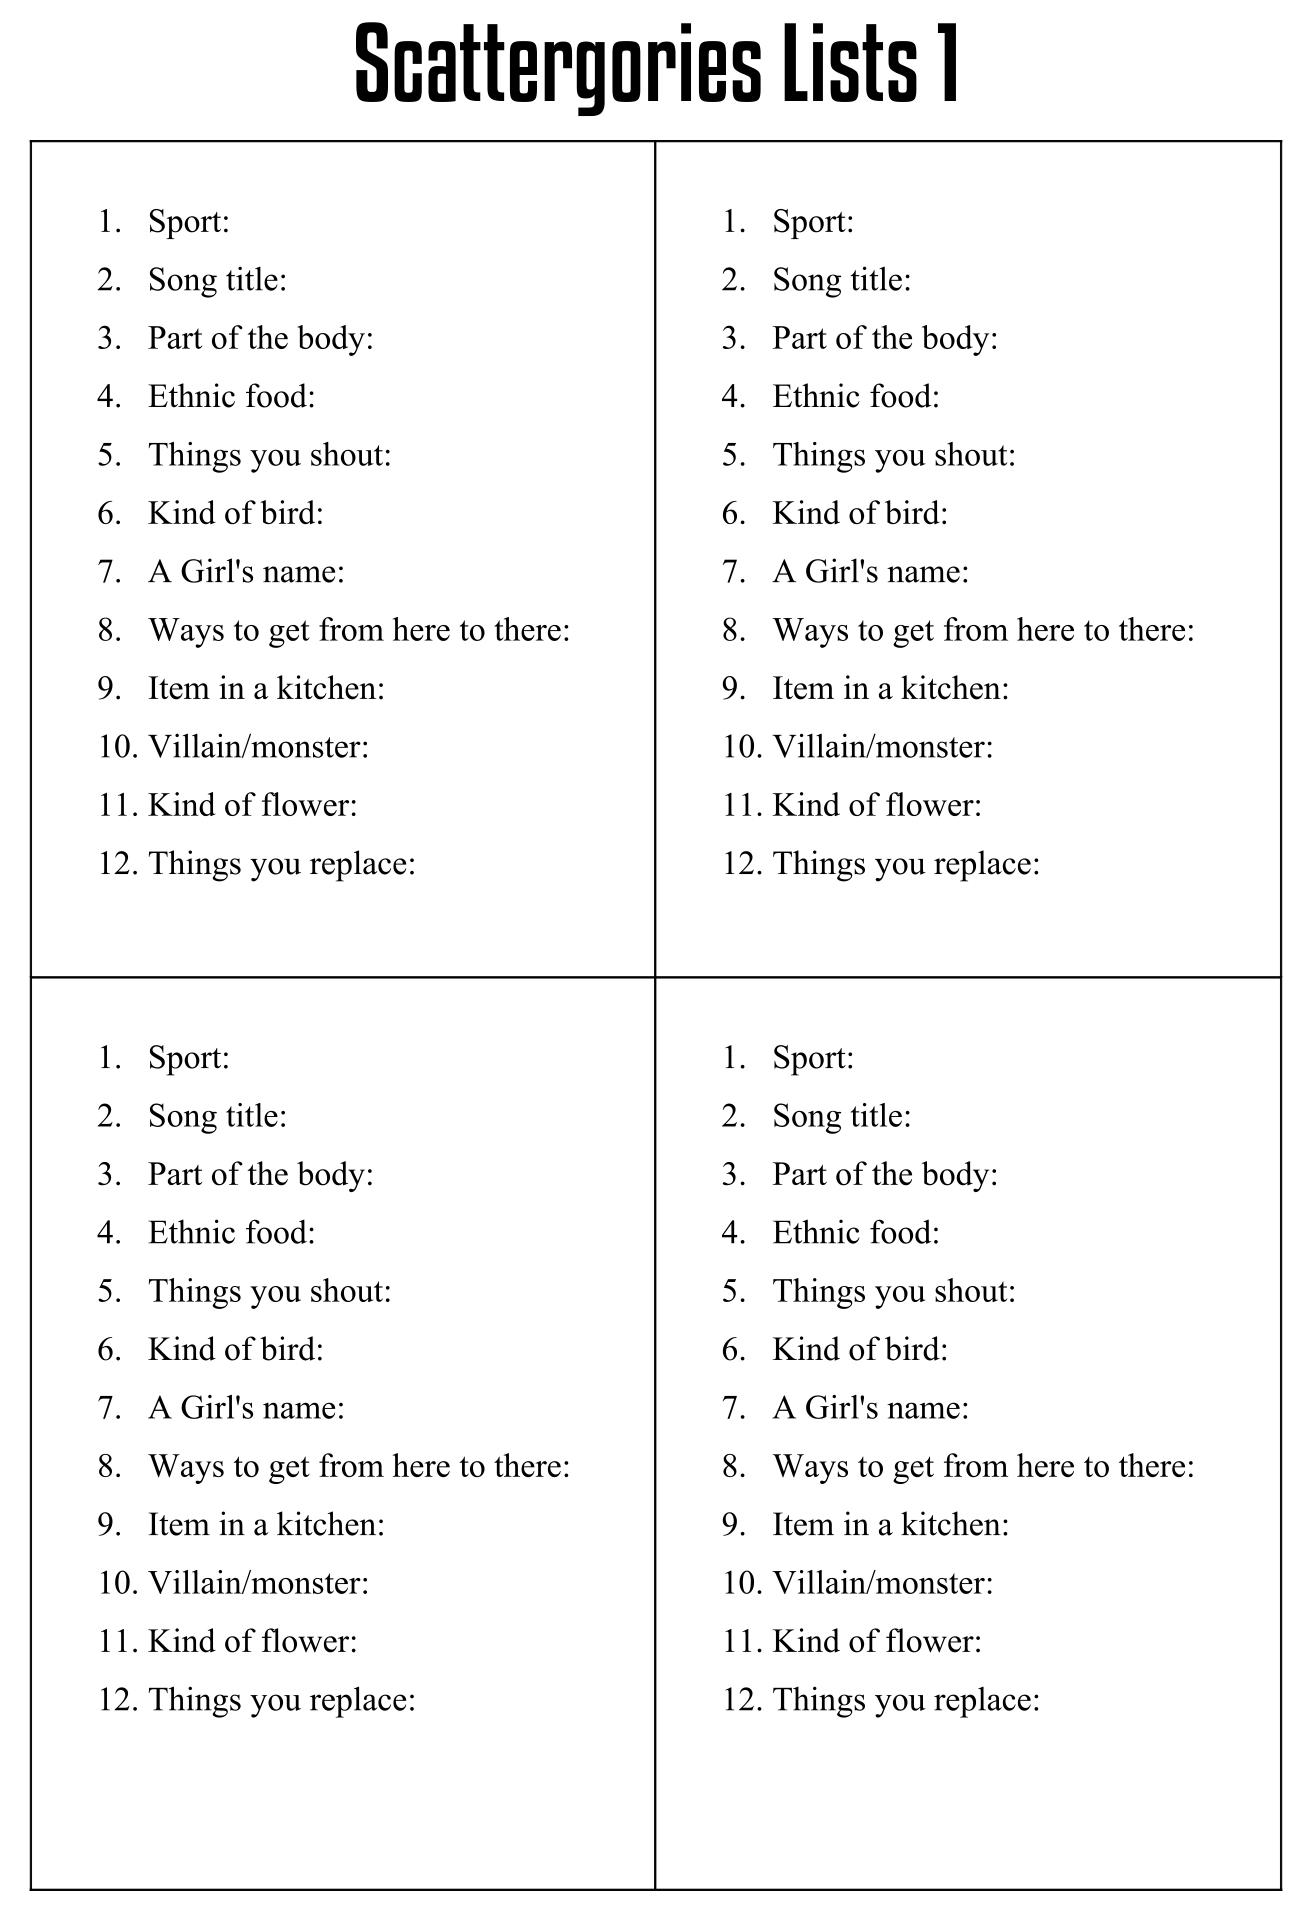 6-best-images-of-scattergories-lists-printable-printable